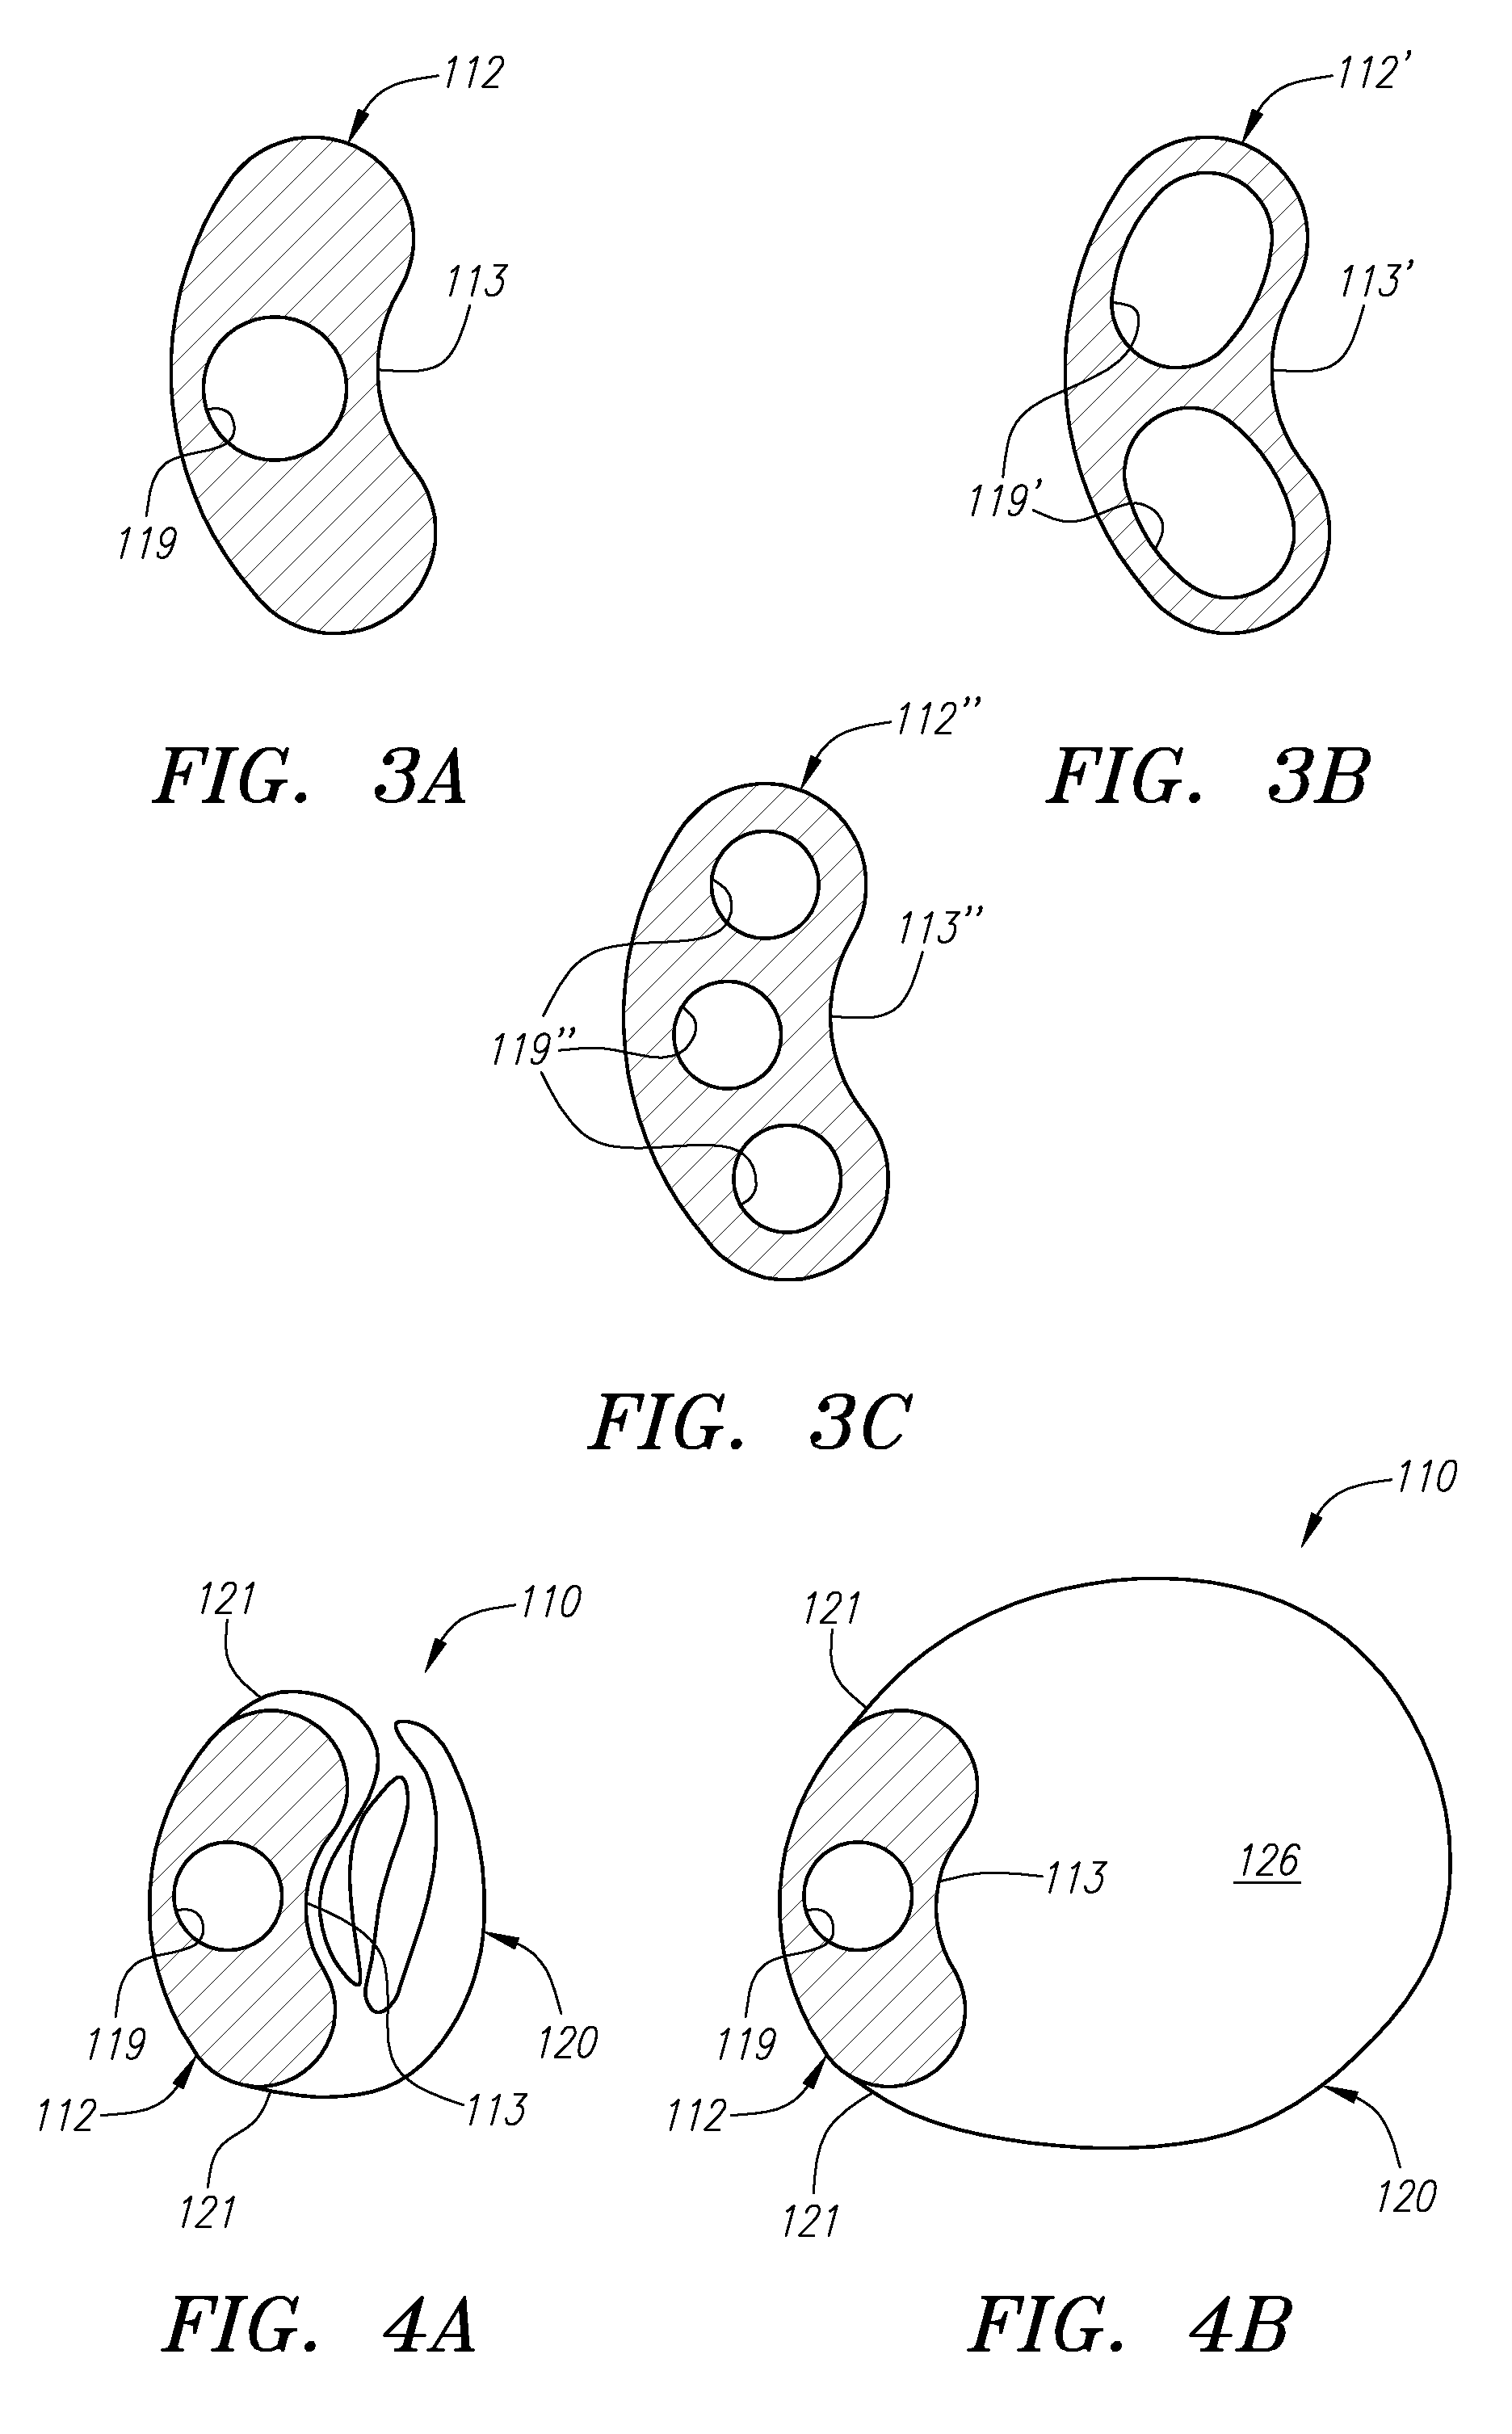 Expandable guide sheath and apparatus and methods for using such sheaths